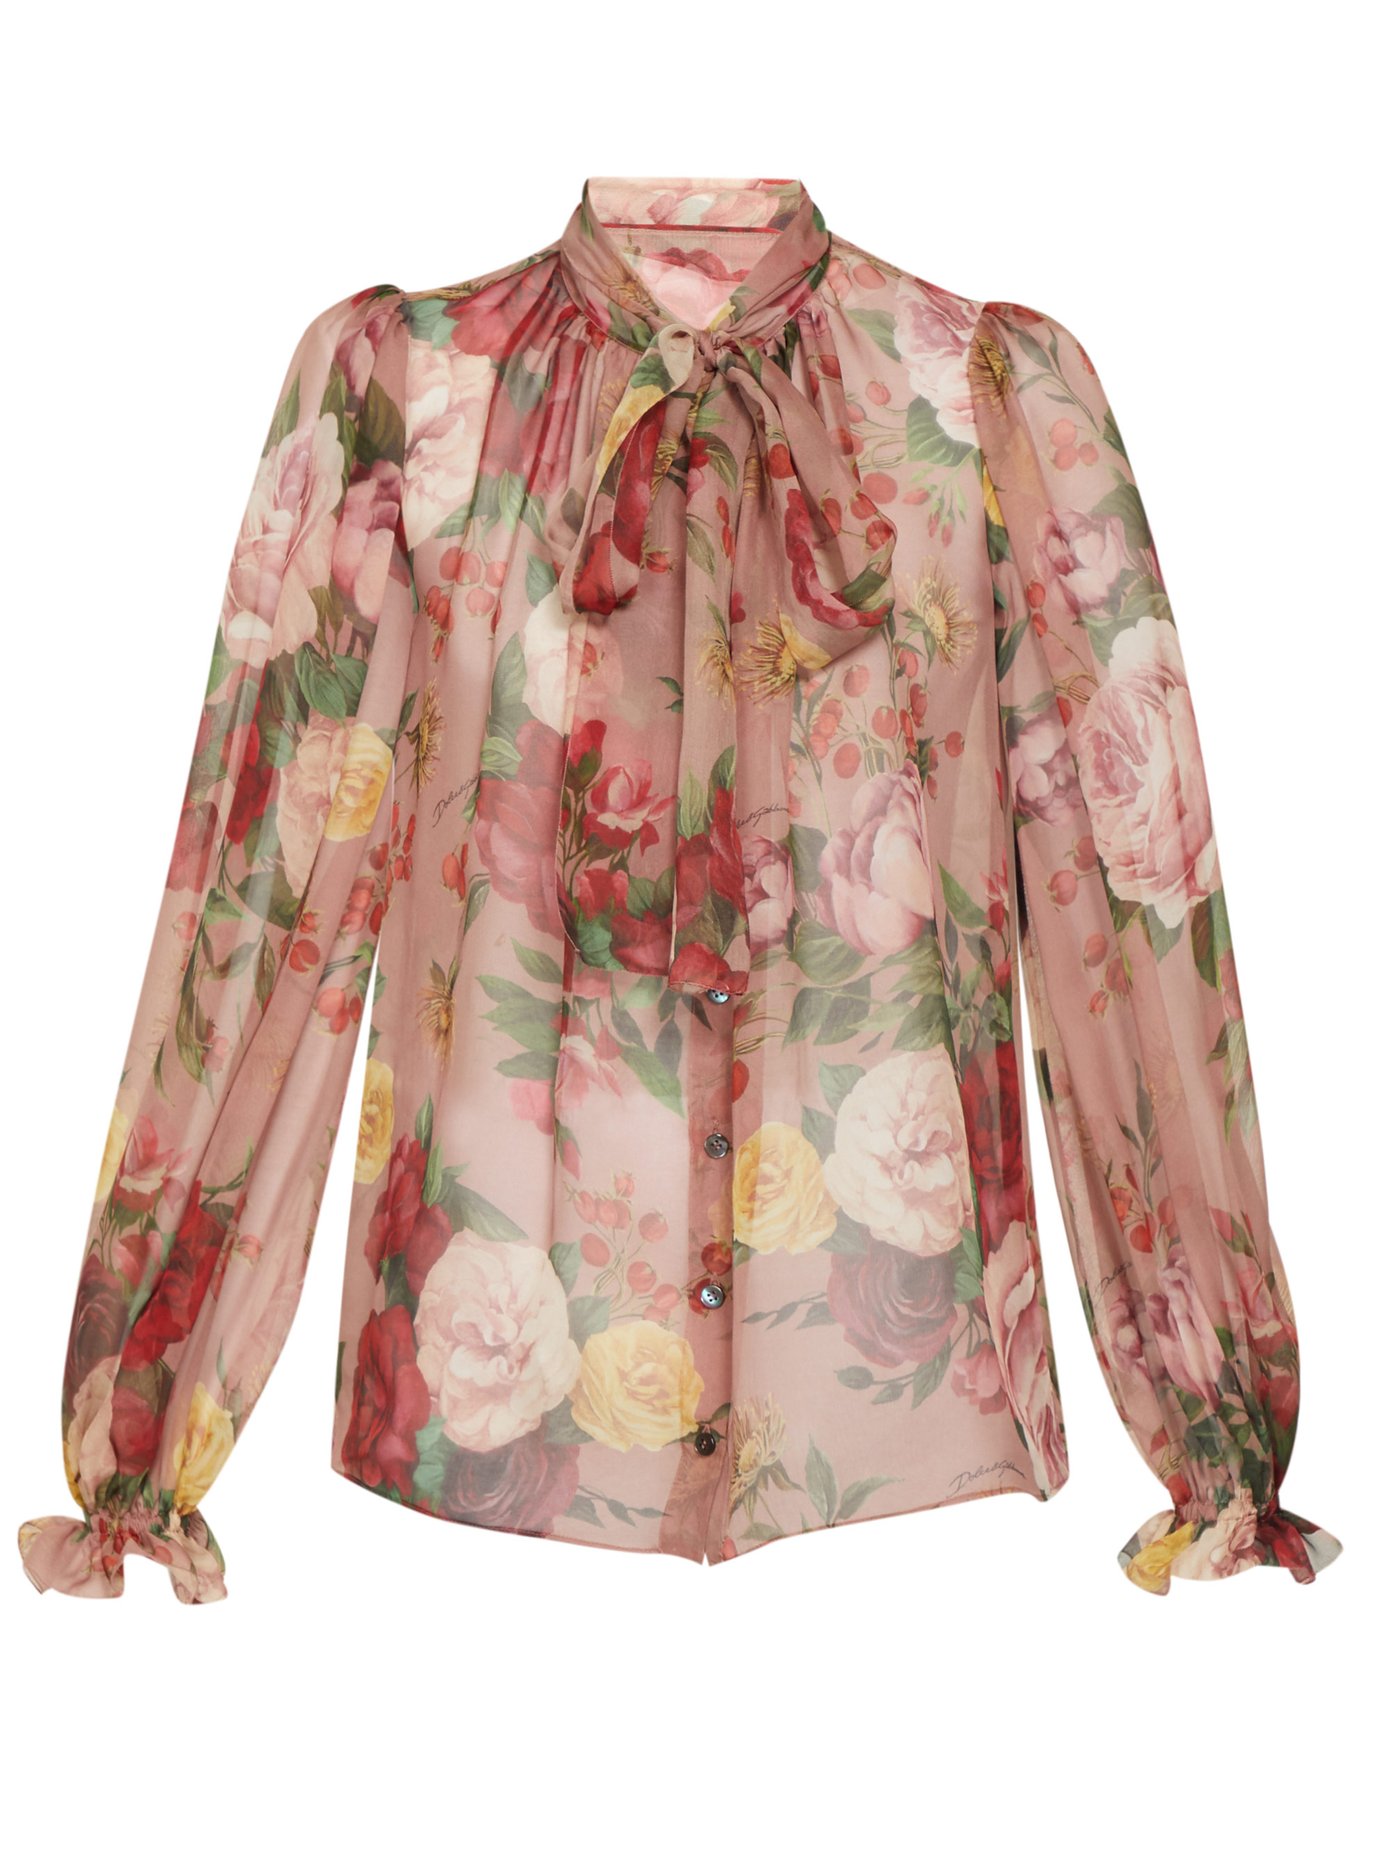 dolce and gabbana floral top